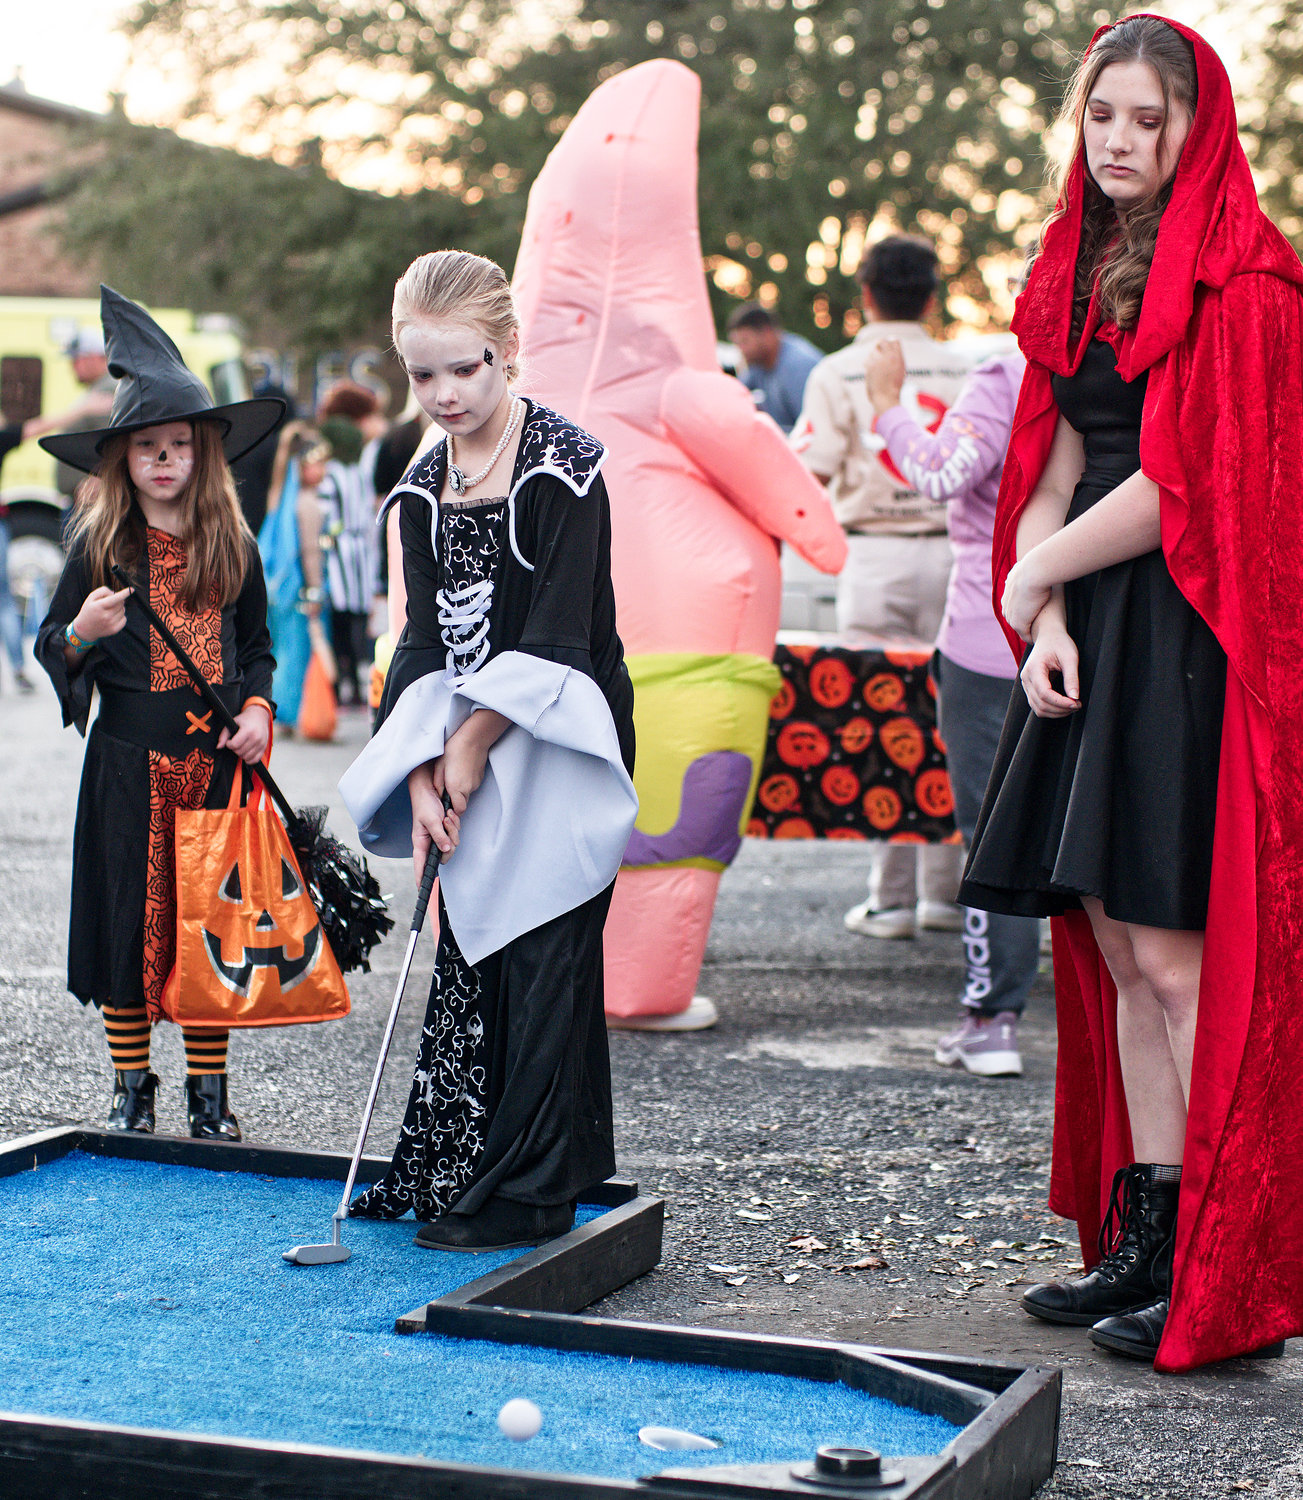 Mini-golfers played the course on the square in Quitman. [See more spooks, if you dare.]